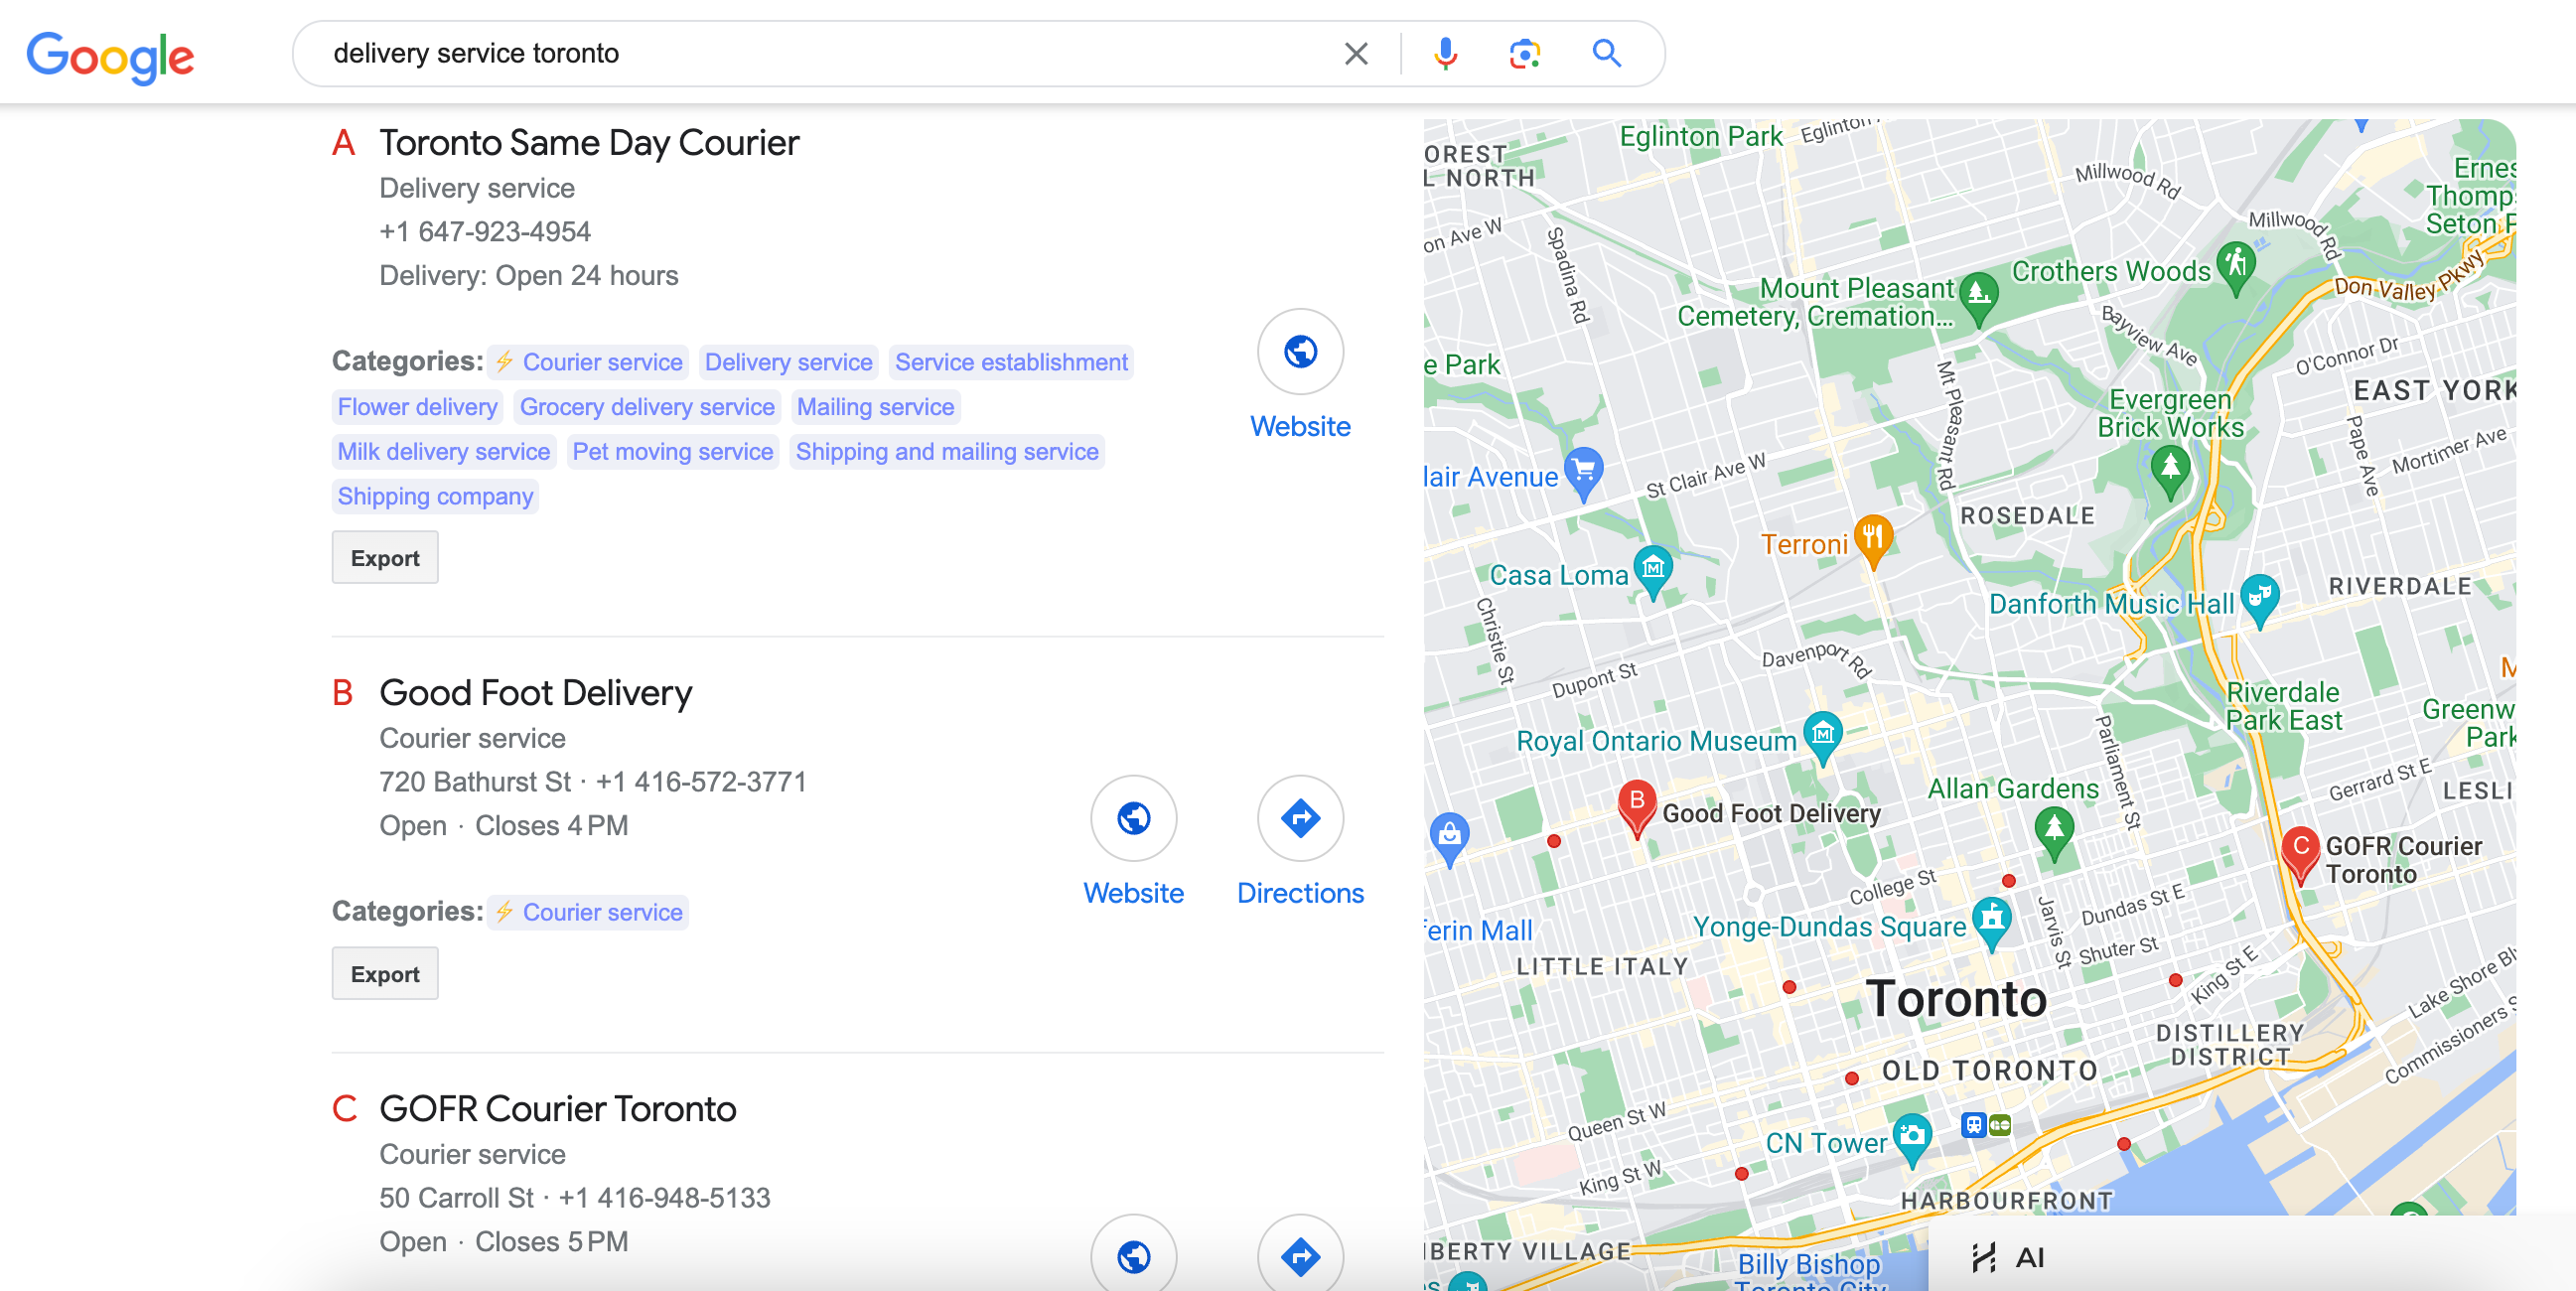 The Example of Google Business Profile ranking for delivery service in Toronto